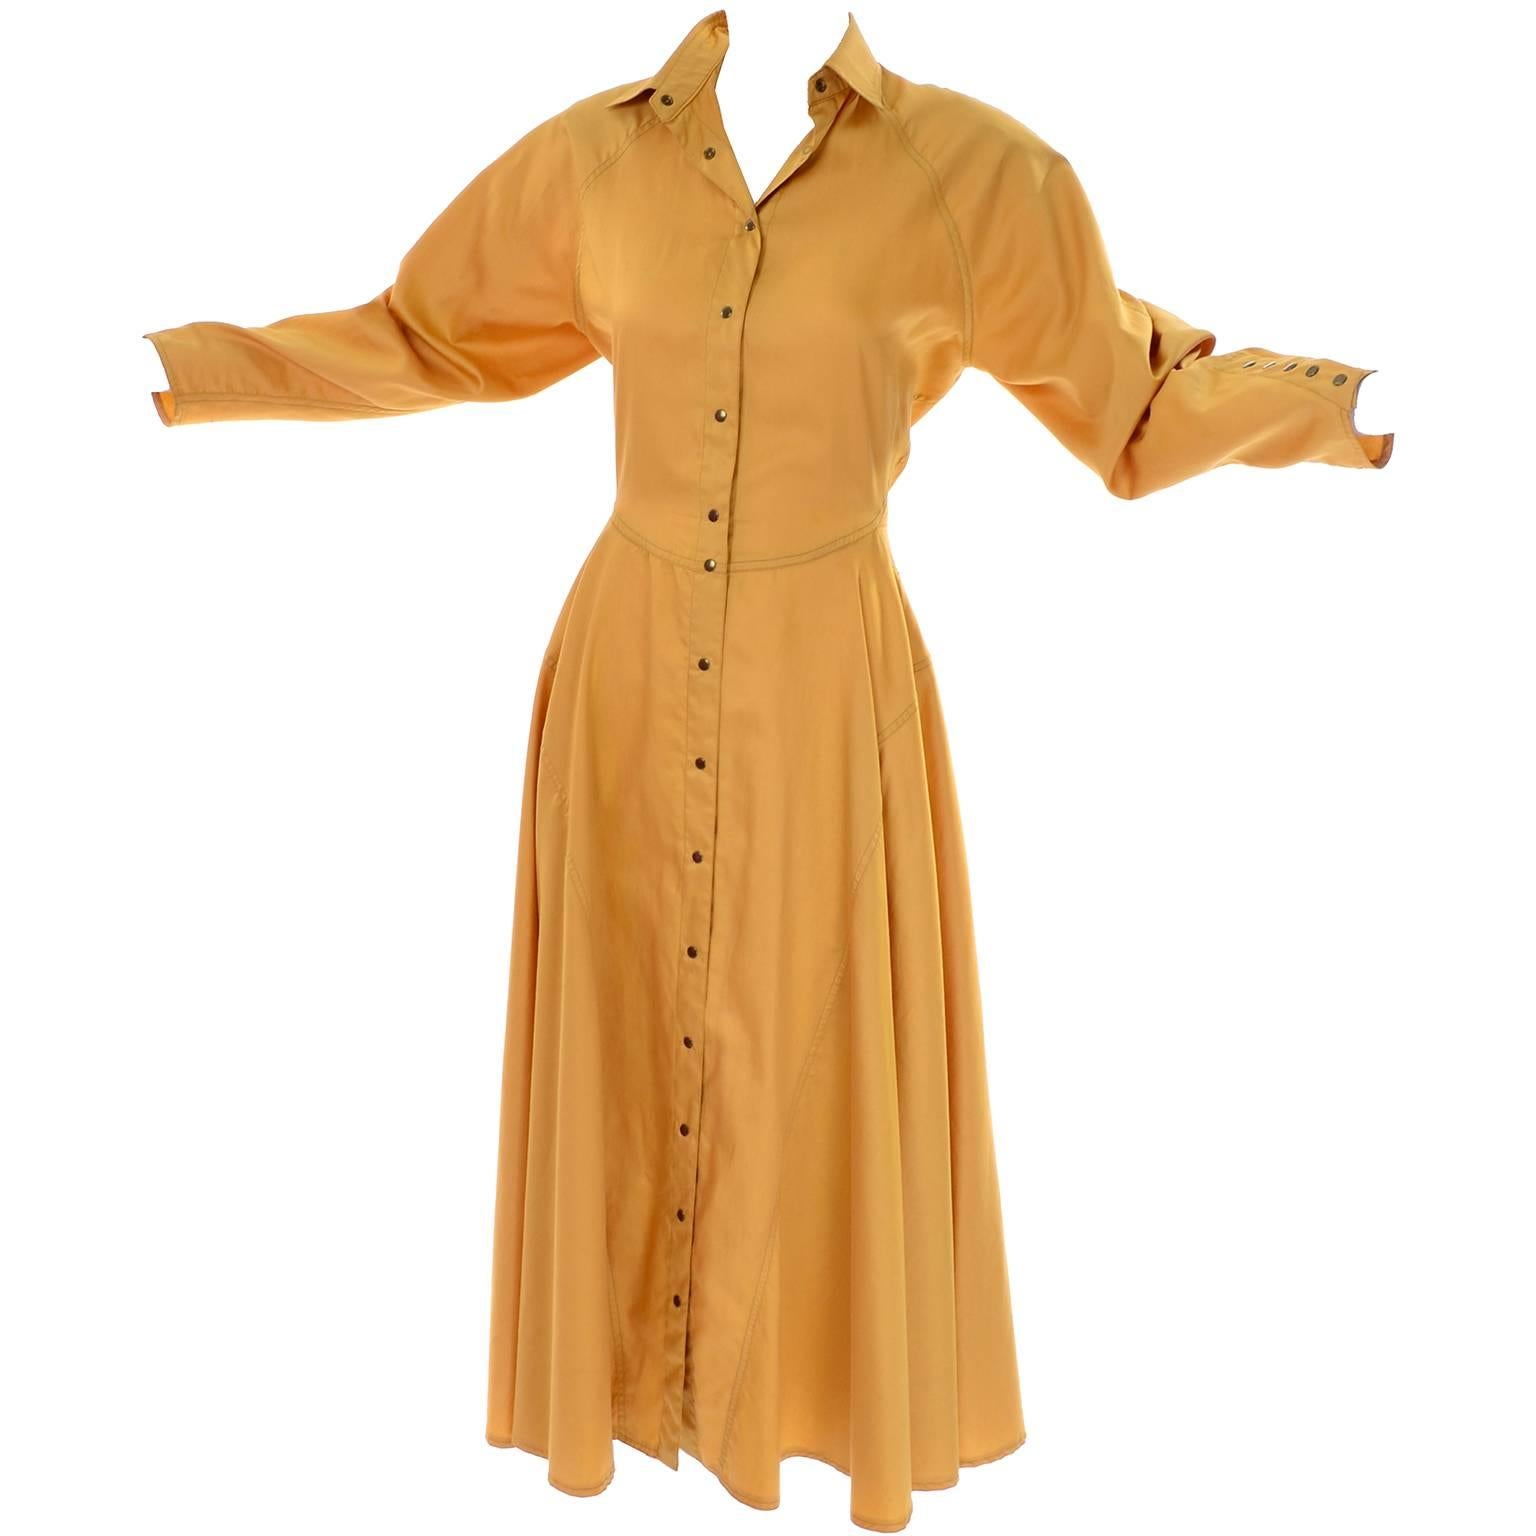 1980s Alaia Vintage Mustard Marigold Dress With a Full Skirt Size 10 French 42 2